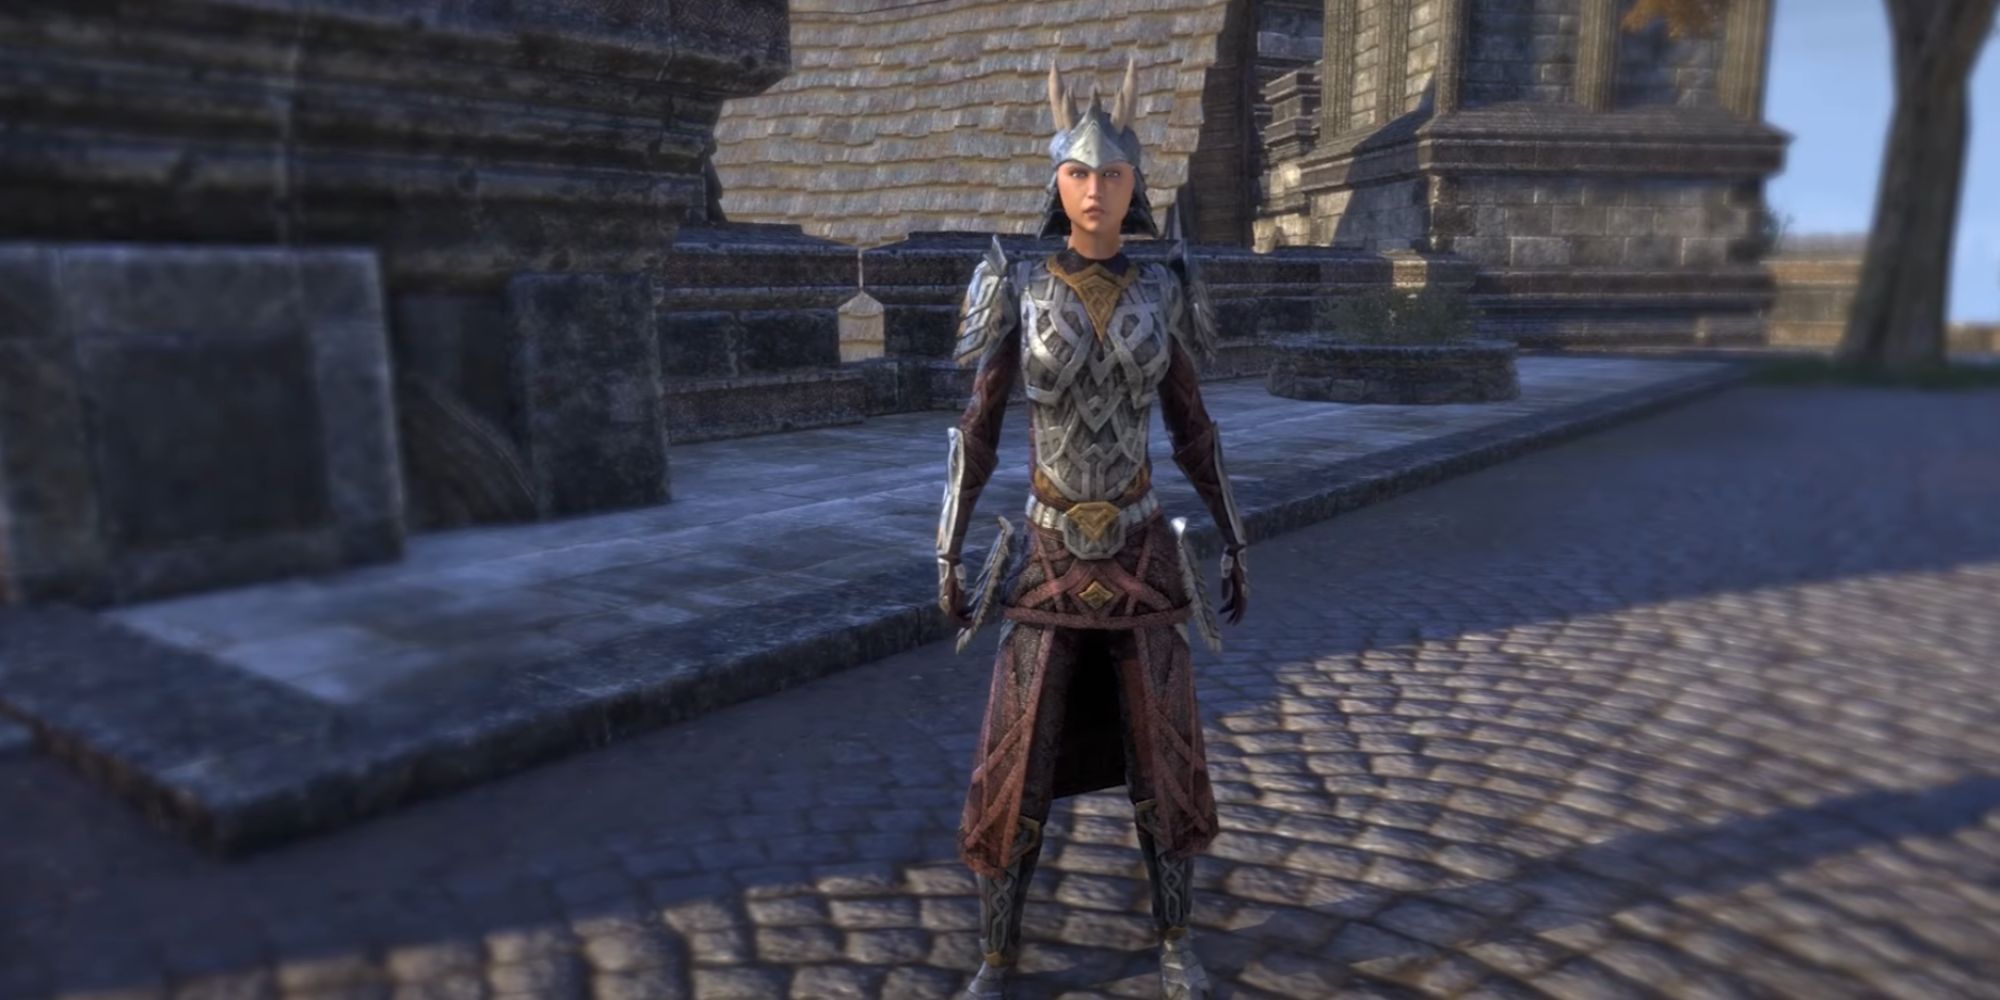 ESO Character Wearing The Regalia Of The Orsimer King